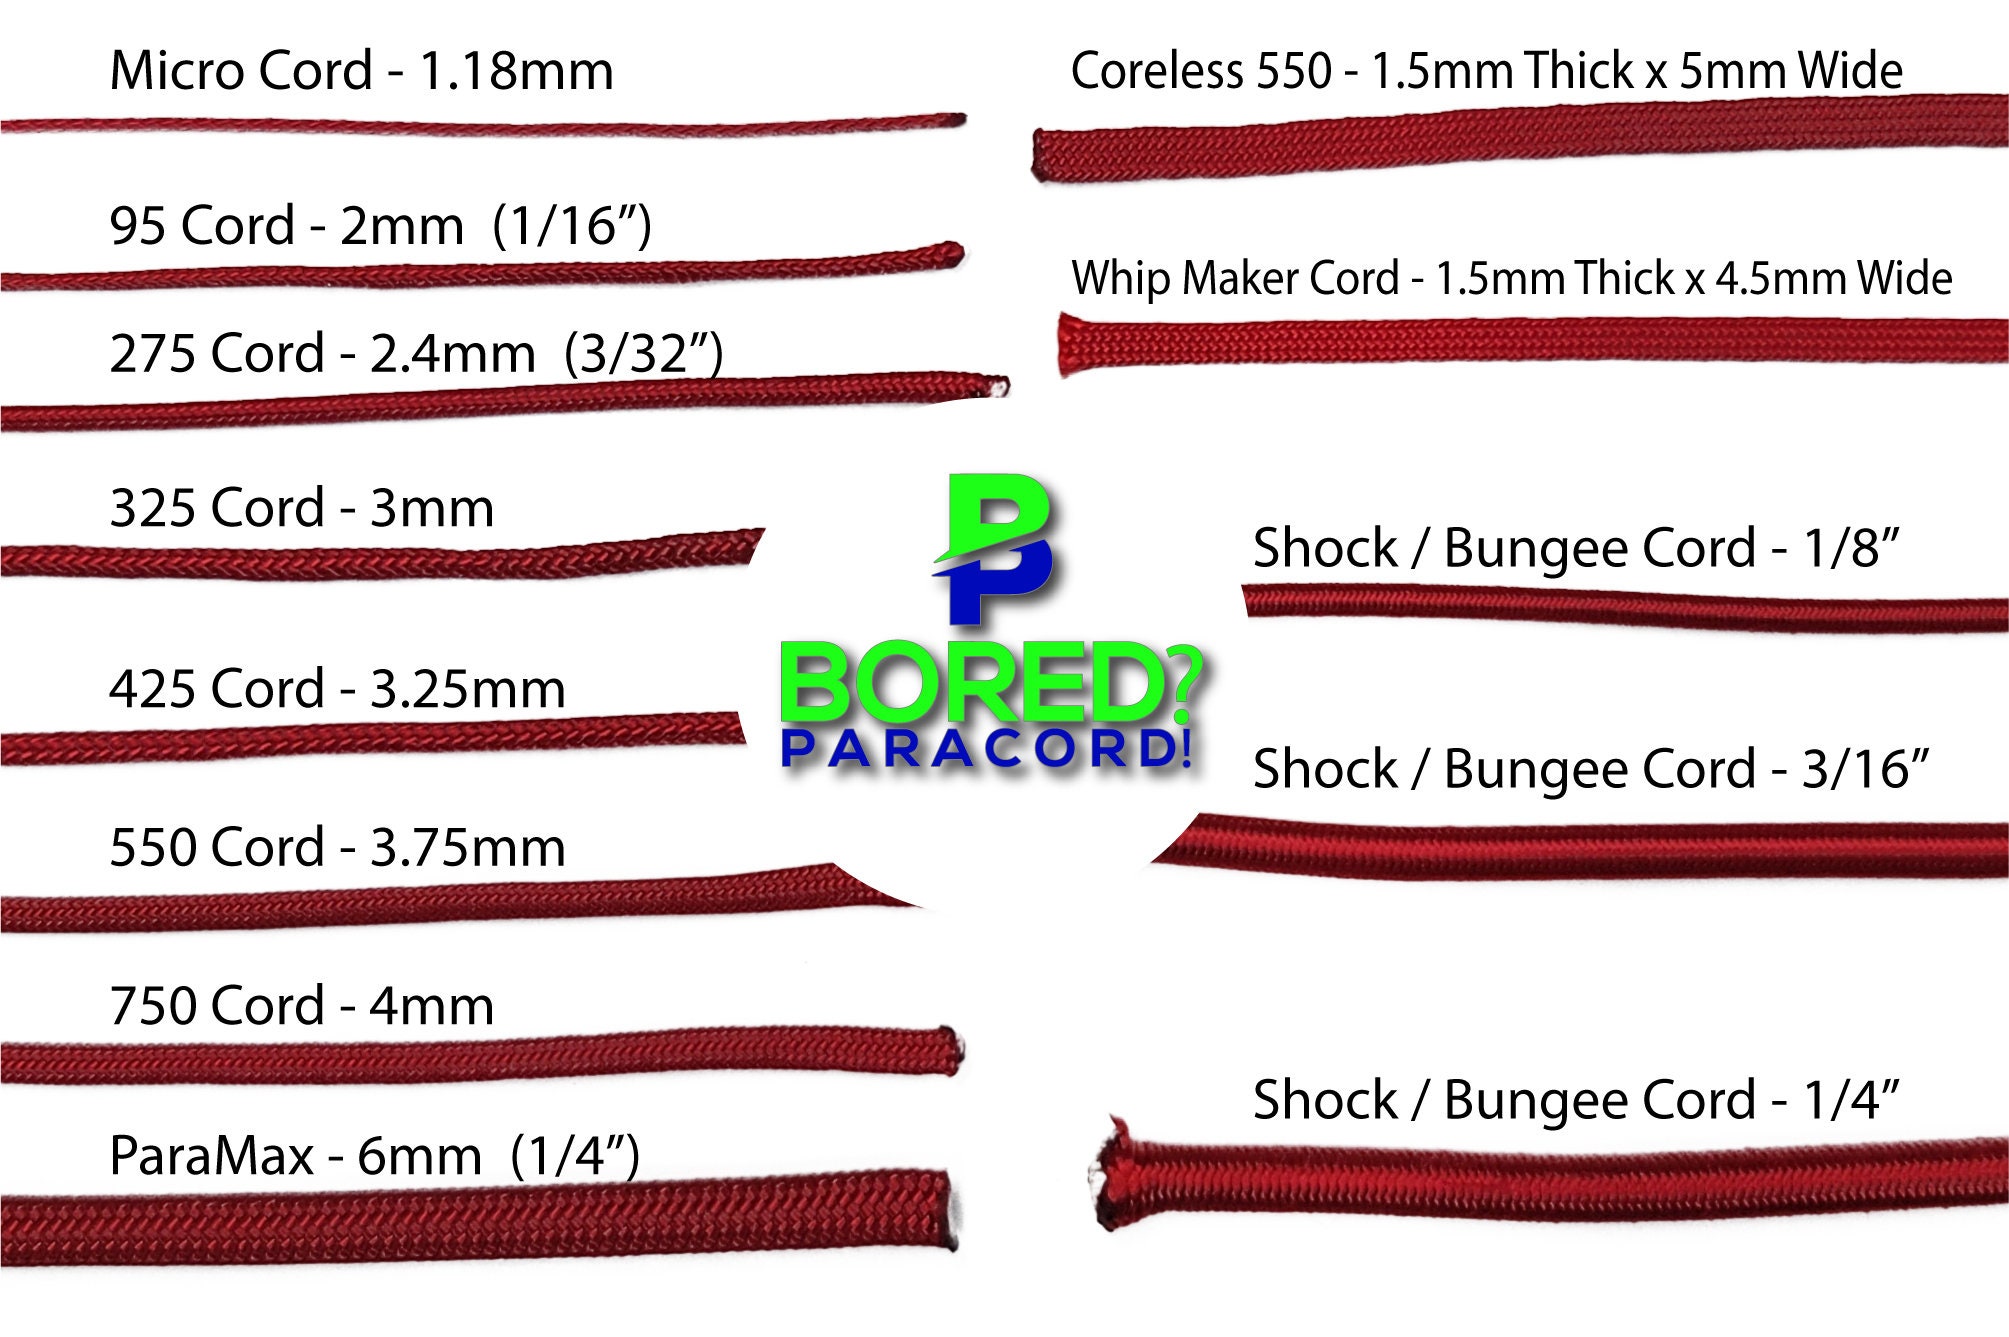 Daybreak - 550 Paracord for Paracord Crafts - Made in the United States -  25ft 50ft 100ft - Bored Paracord